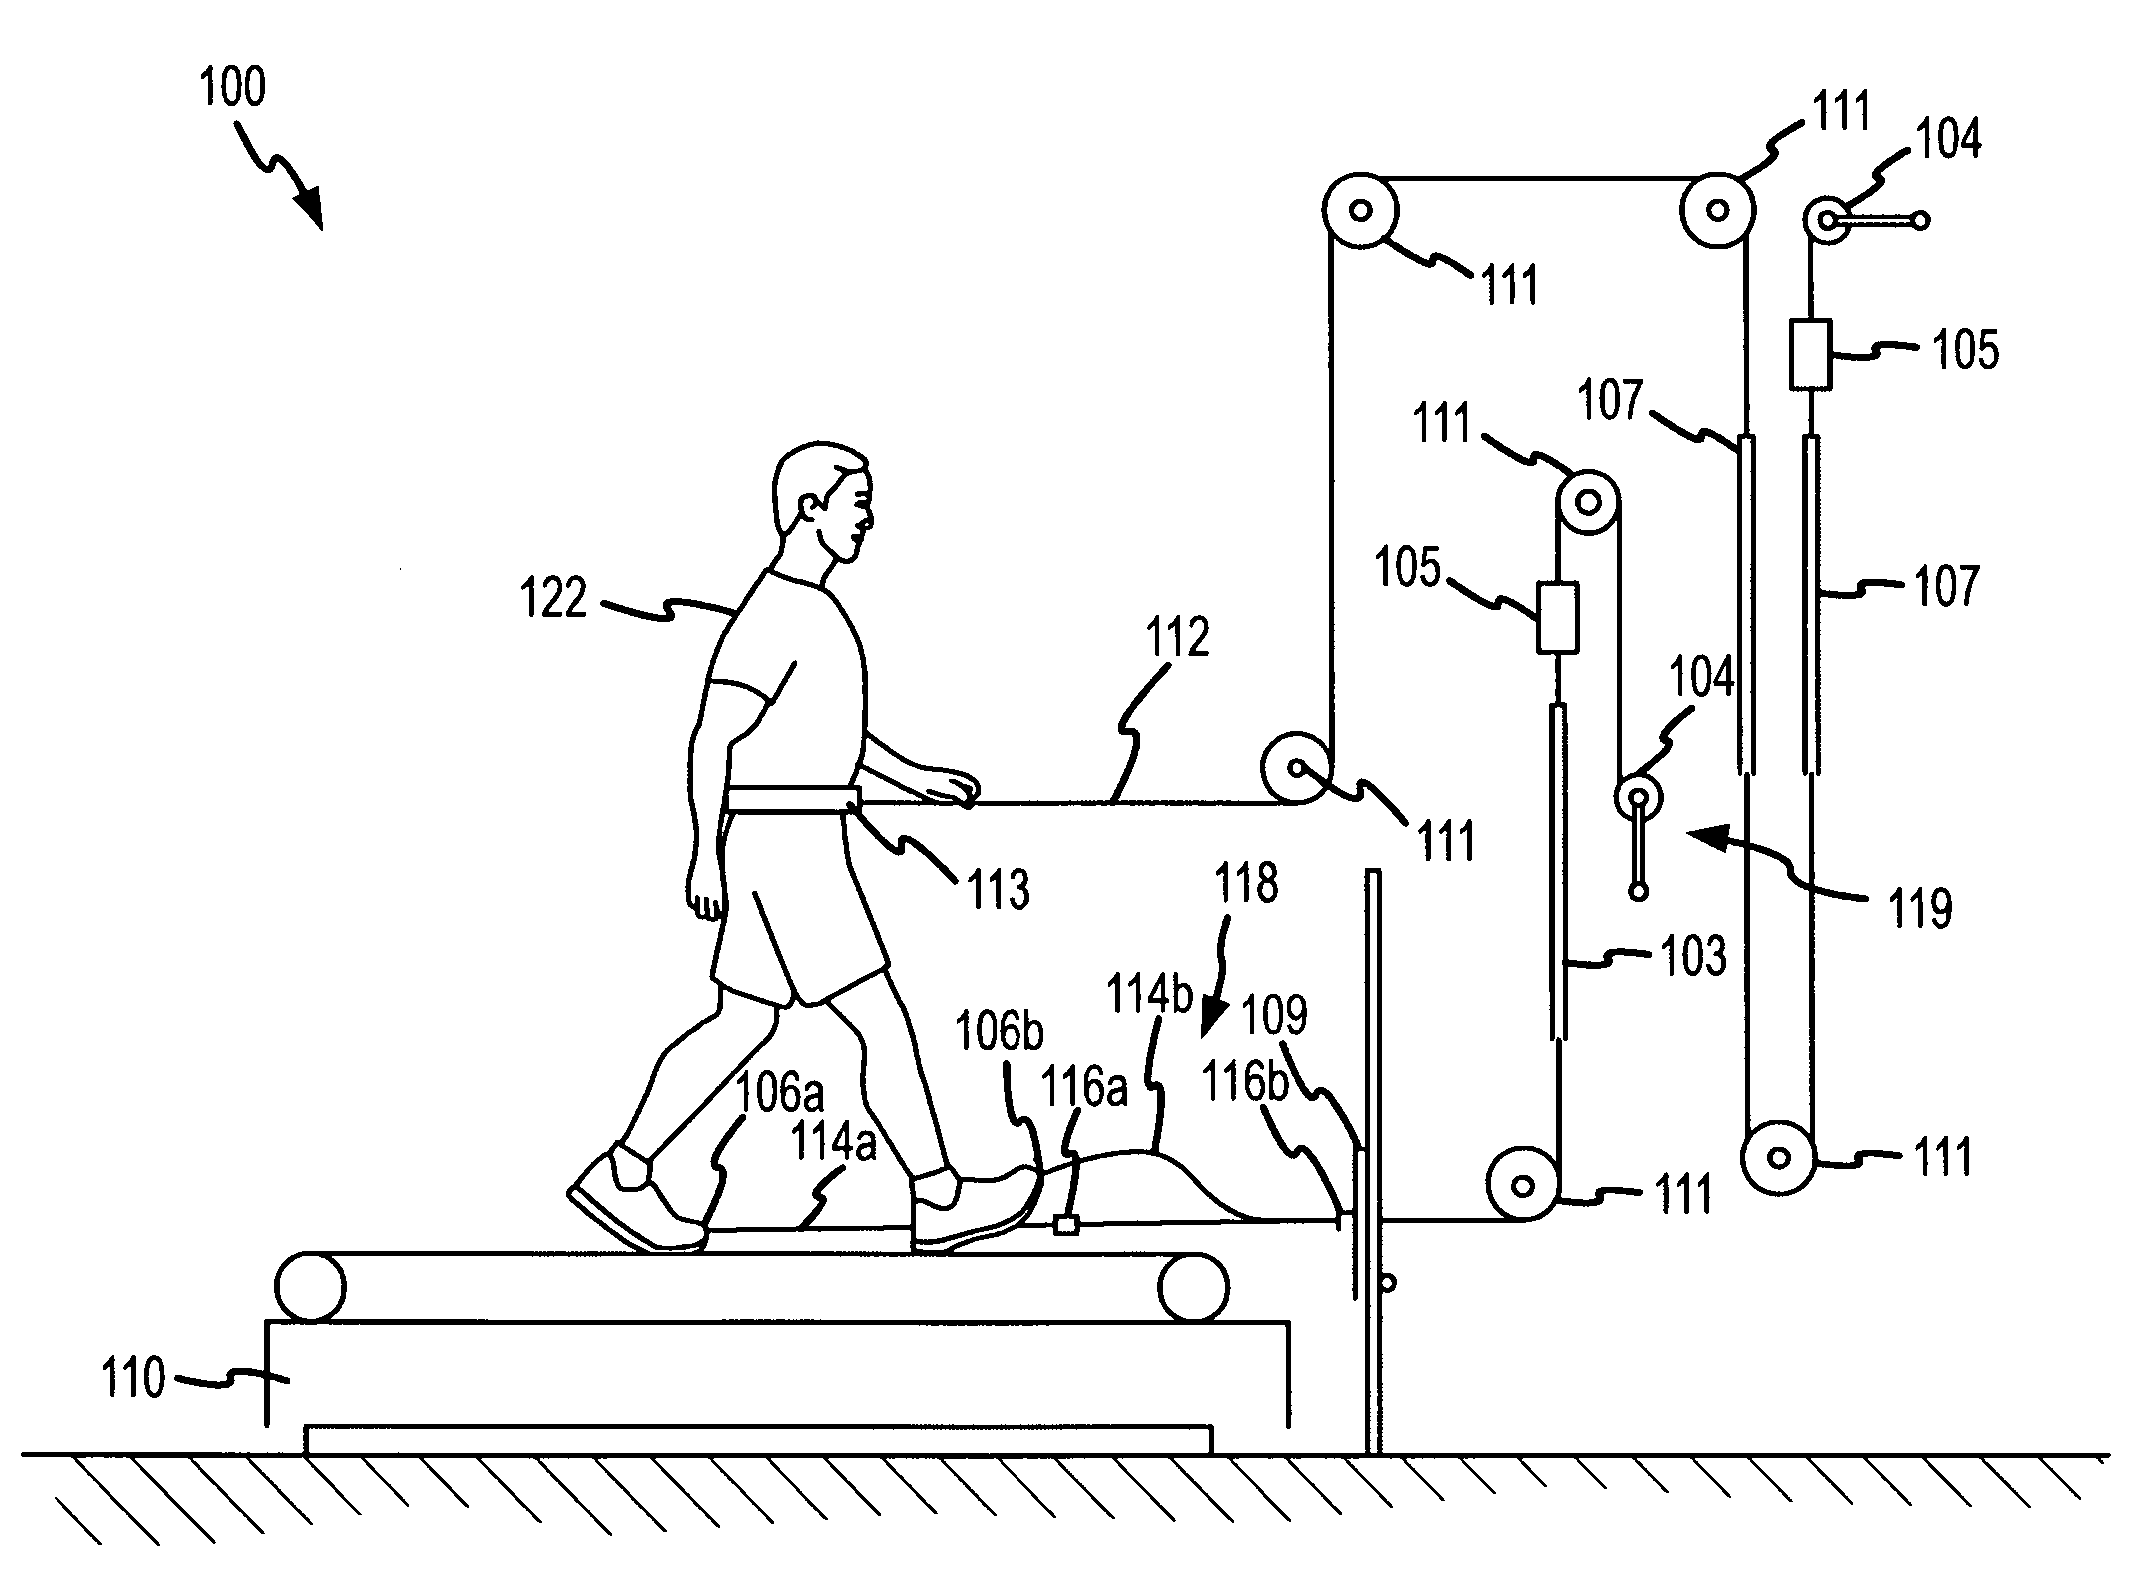 Force assistance device for walking rehabilitation therapy